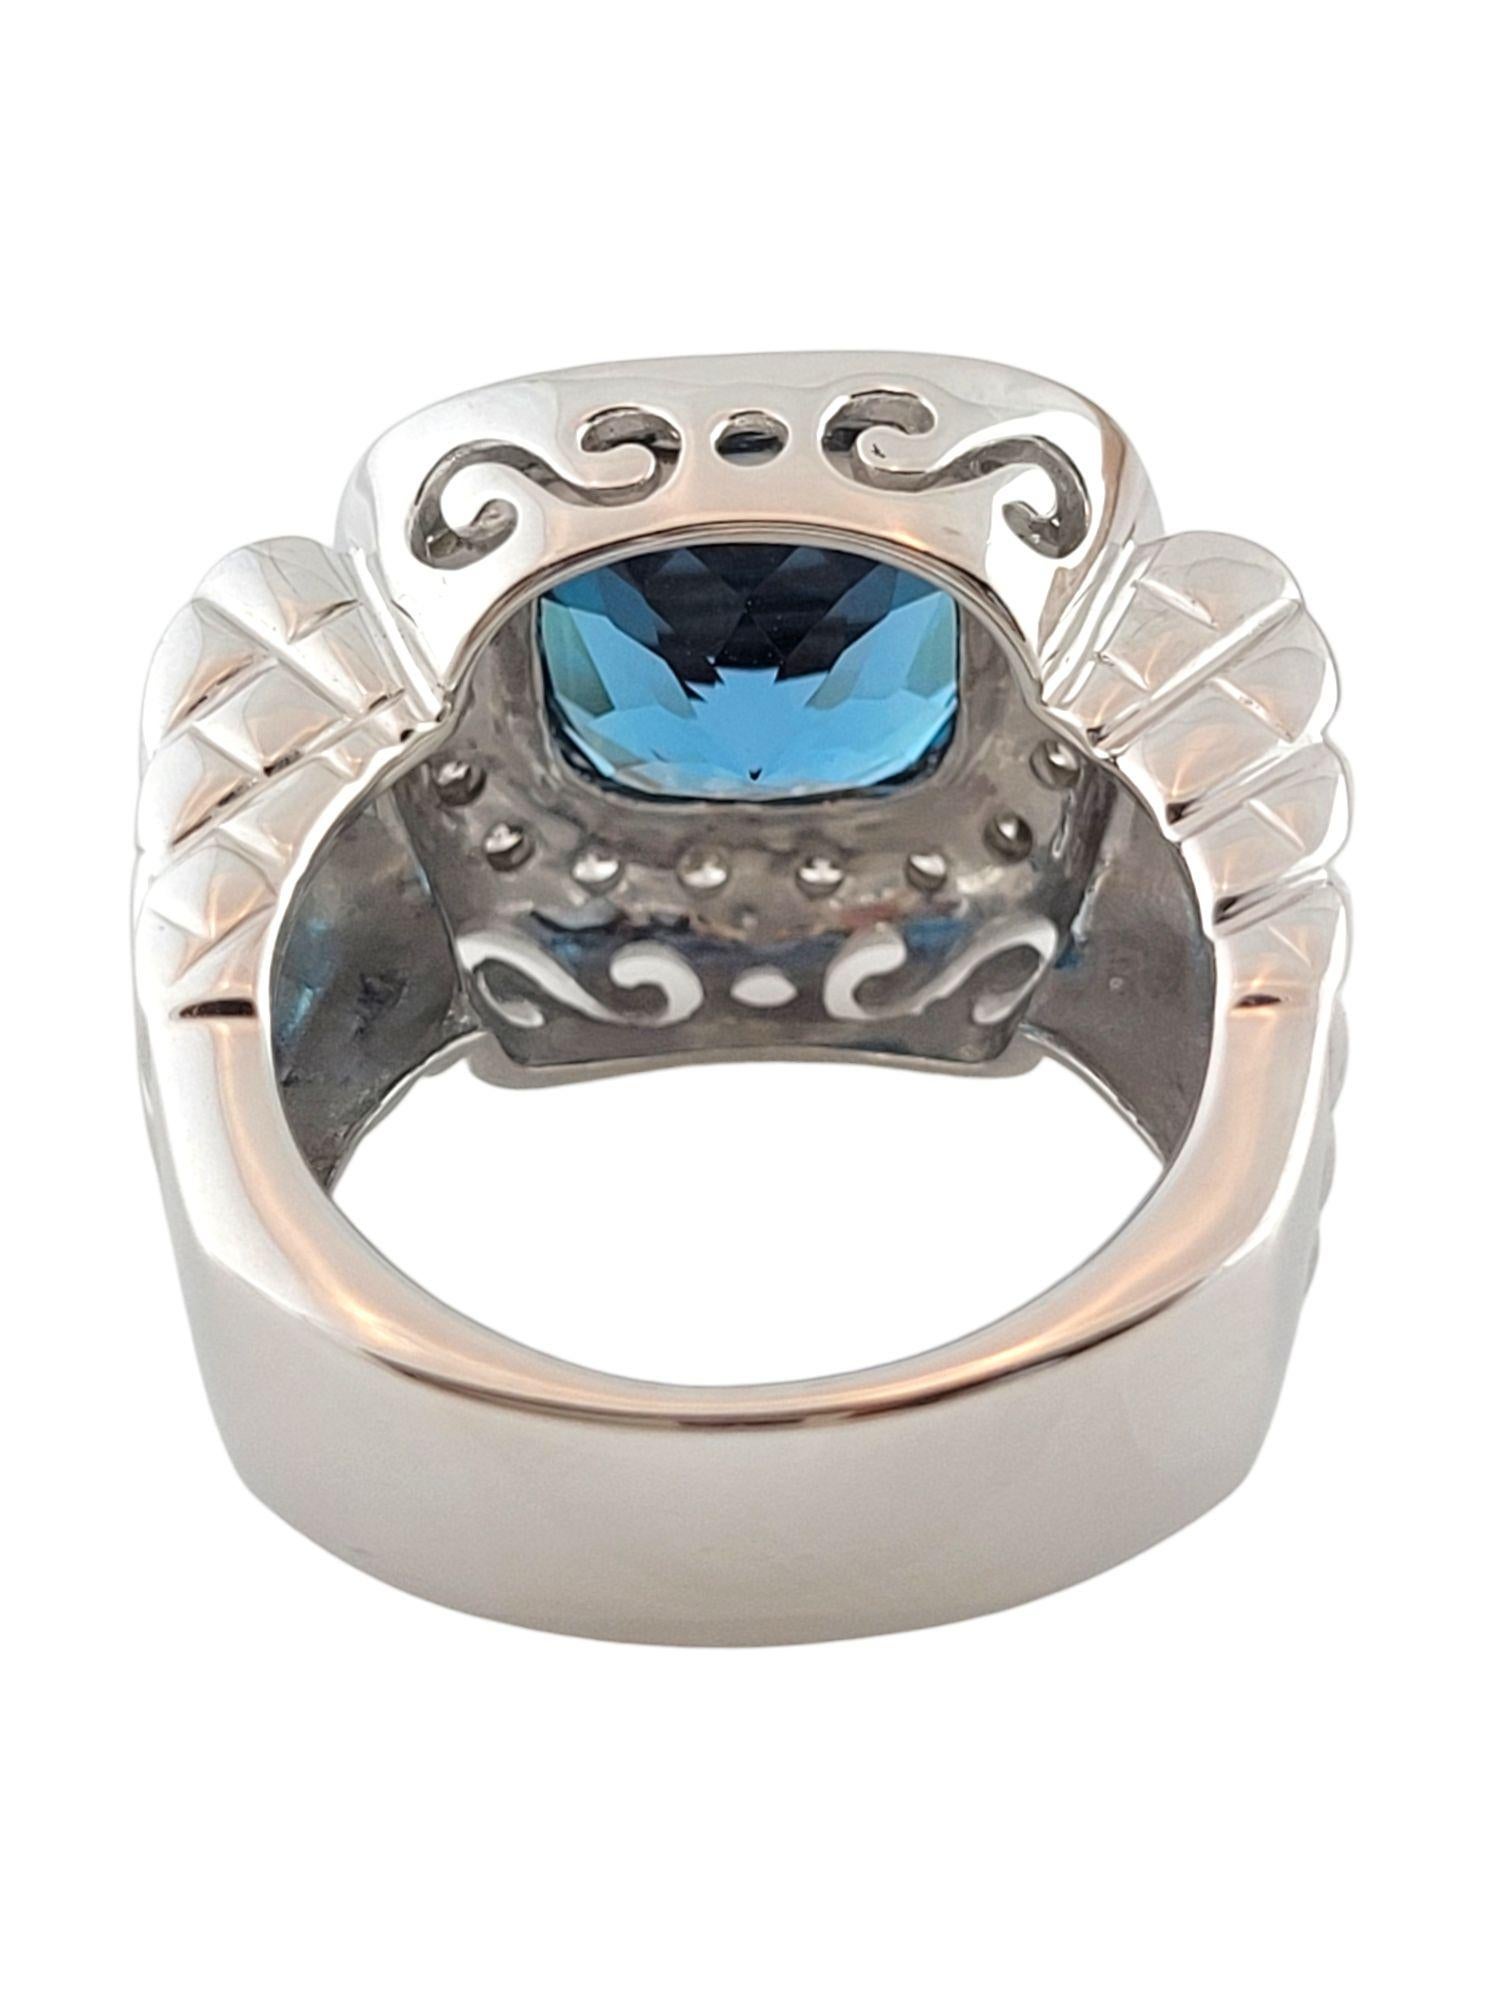 Square Cut 14K White Gold Blue Topaz Diamond Halo Cocktail Ring Size 7 #14765 For Sale